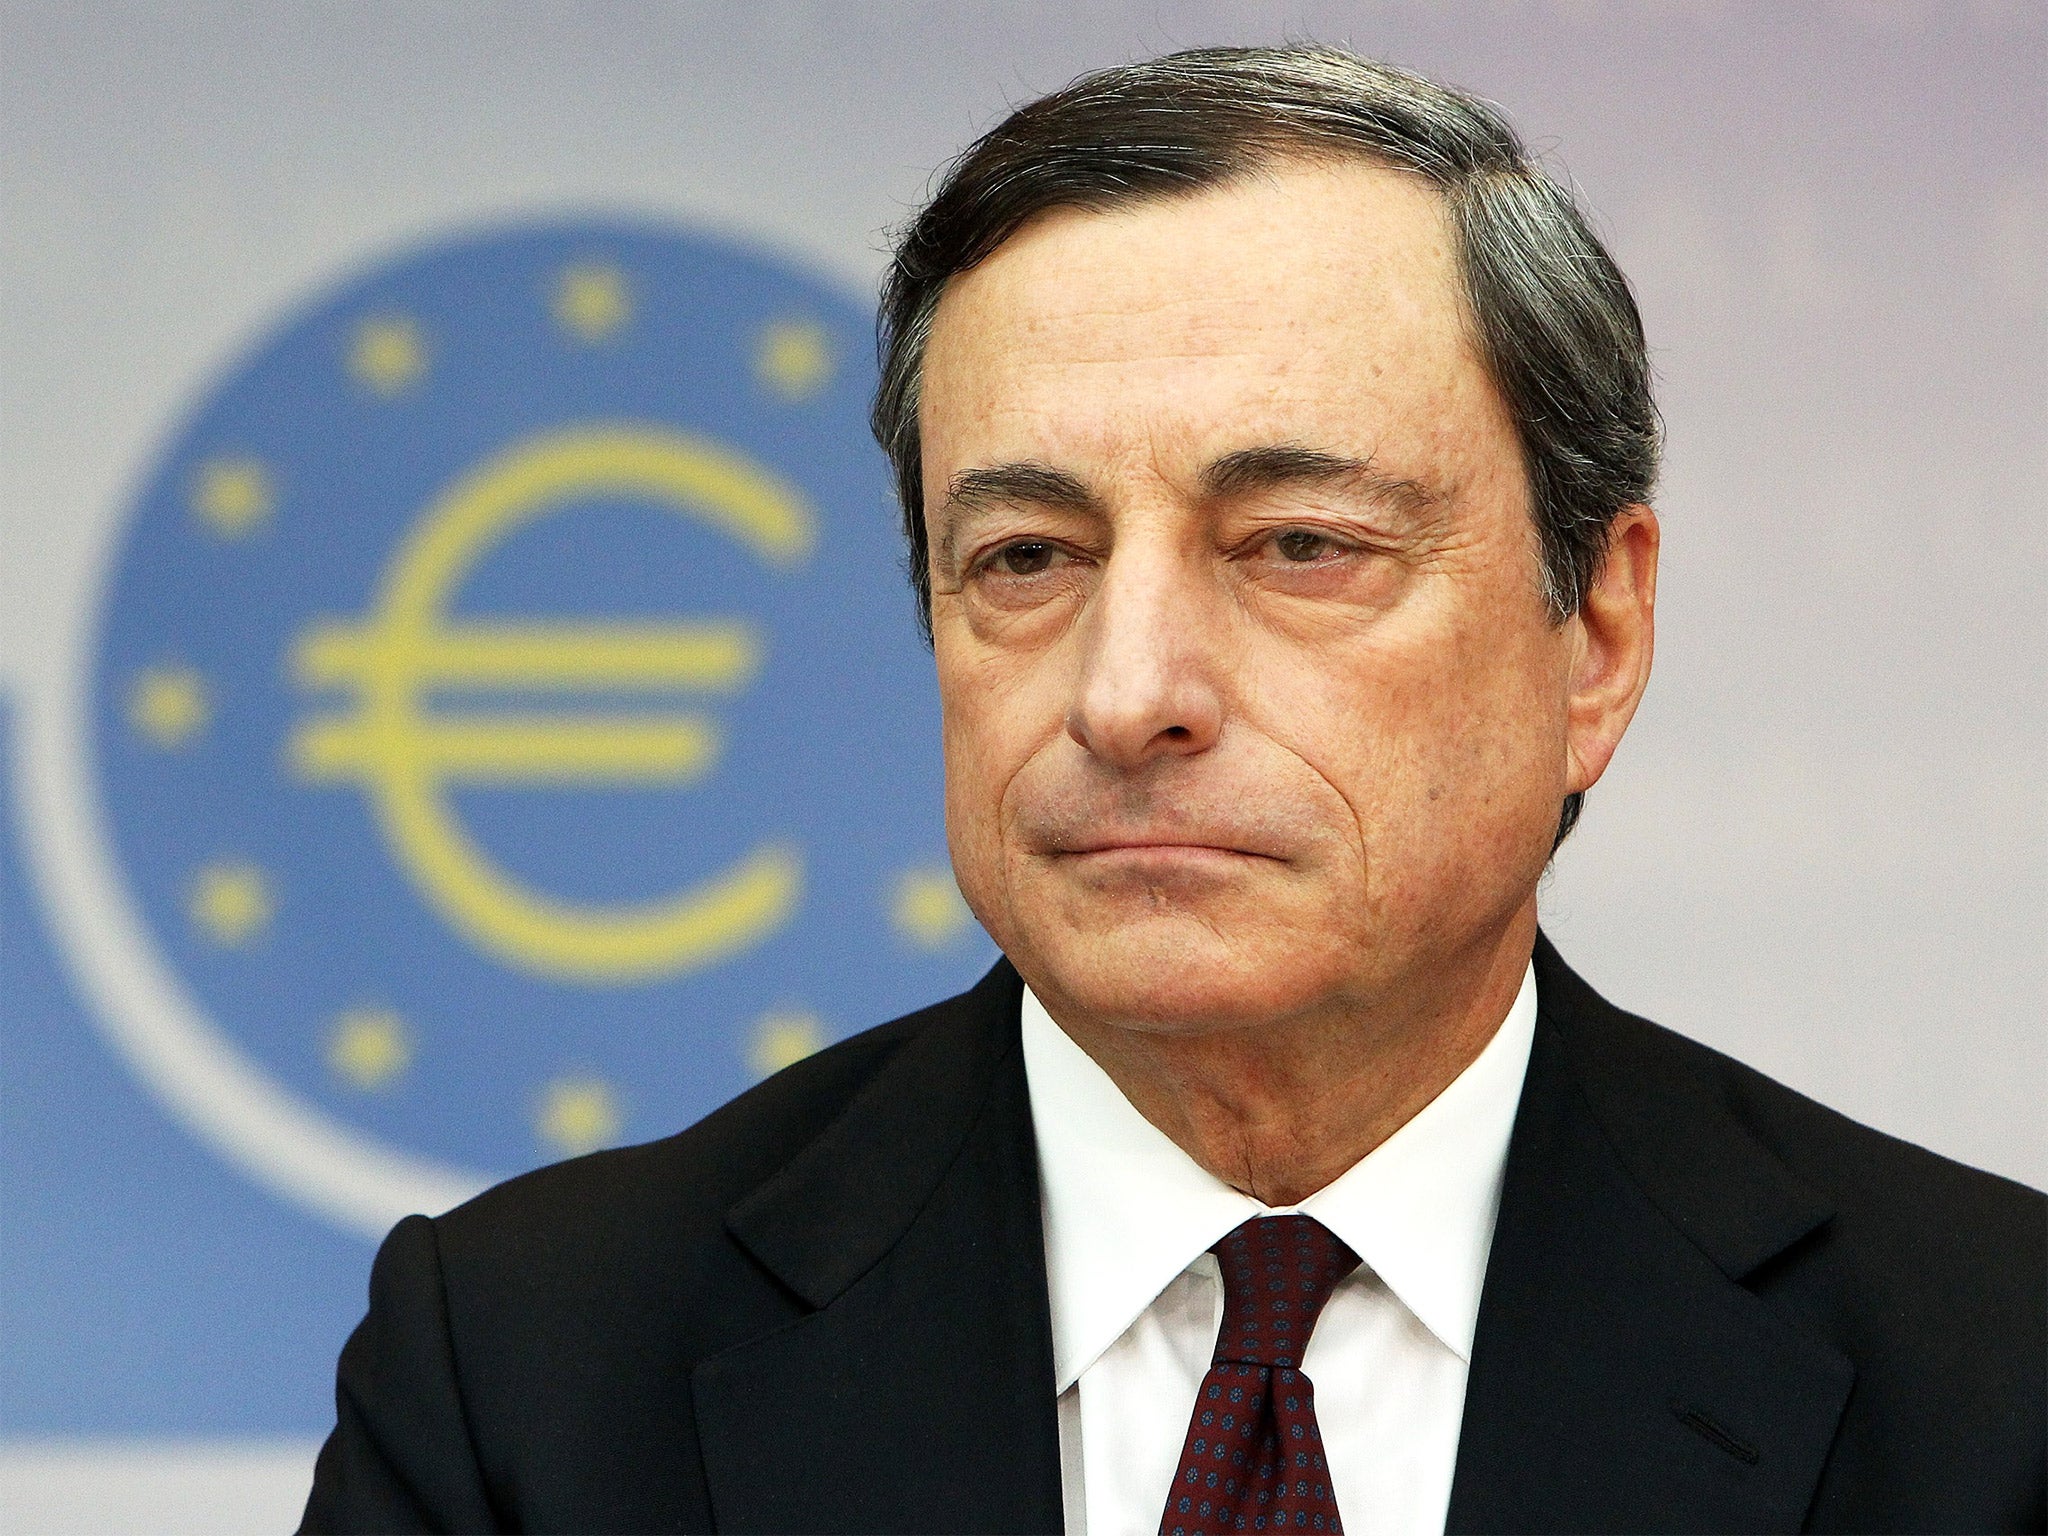 Mario Draghi has to perform a delicate balancing act – keeping the Germans happy but also getting value for money